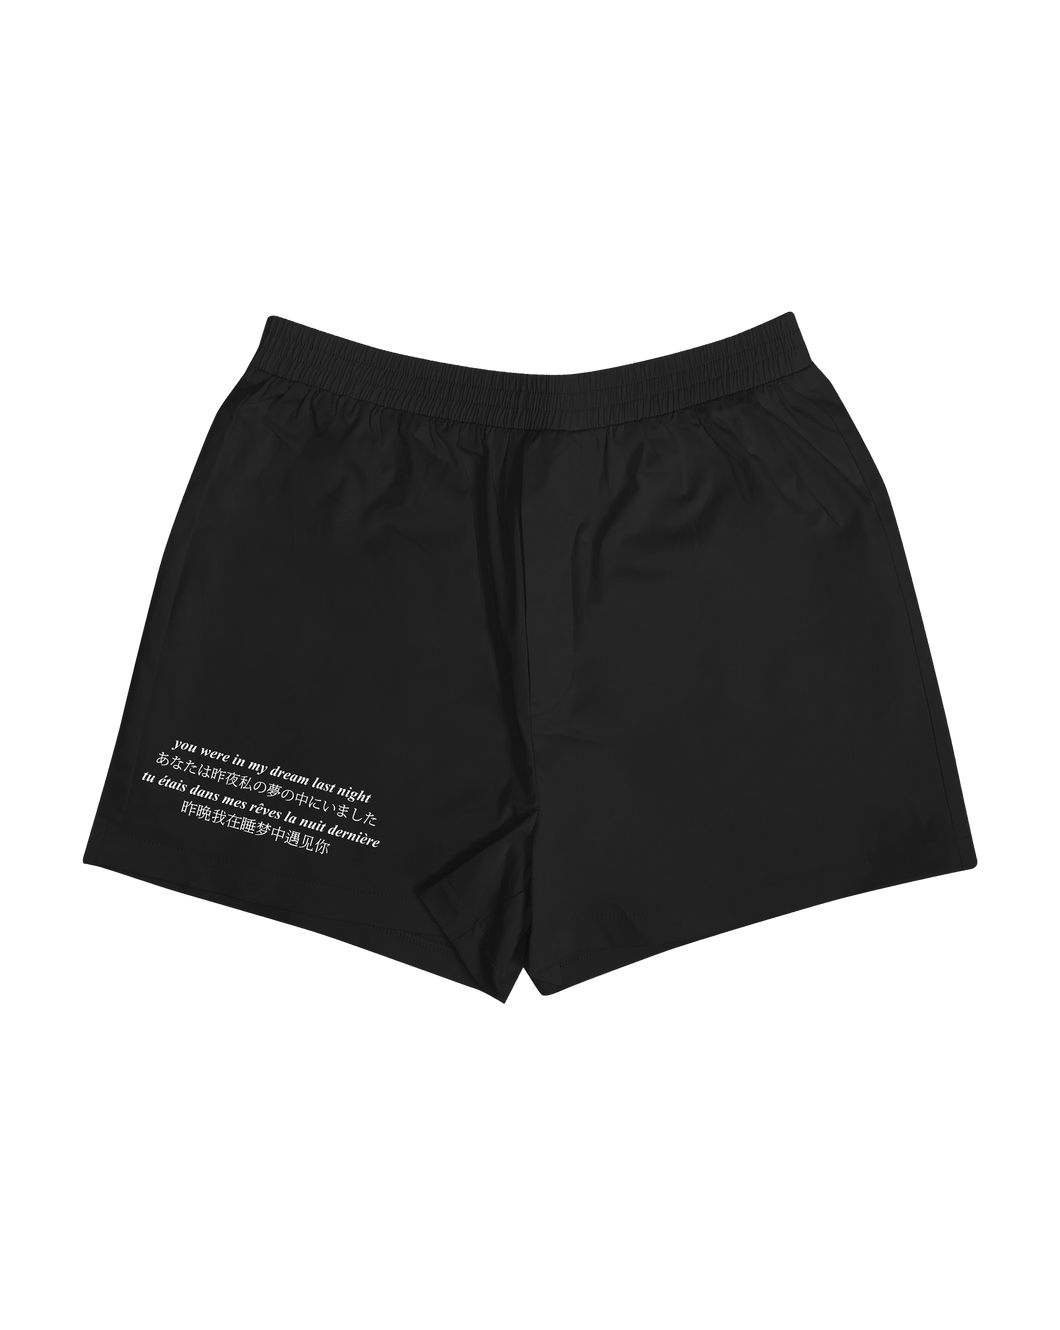 The Dreamer Boxers